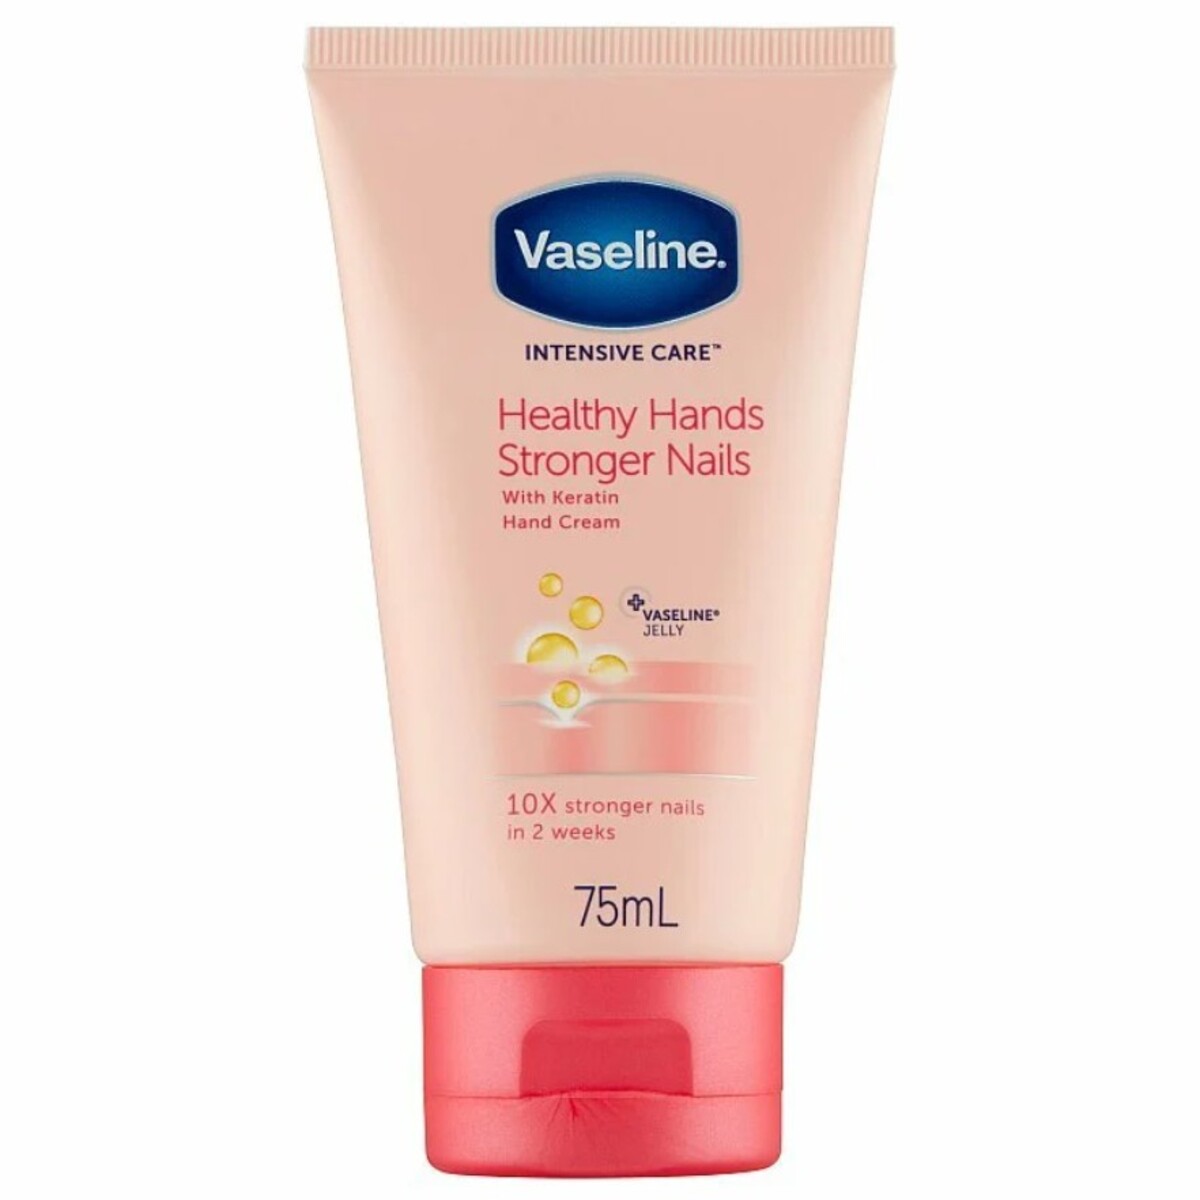 Vaseline Intensive Care Hand Cream Healthy Hands and Stronger Nails Lotion.